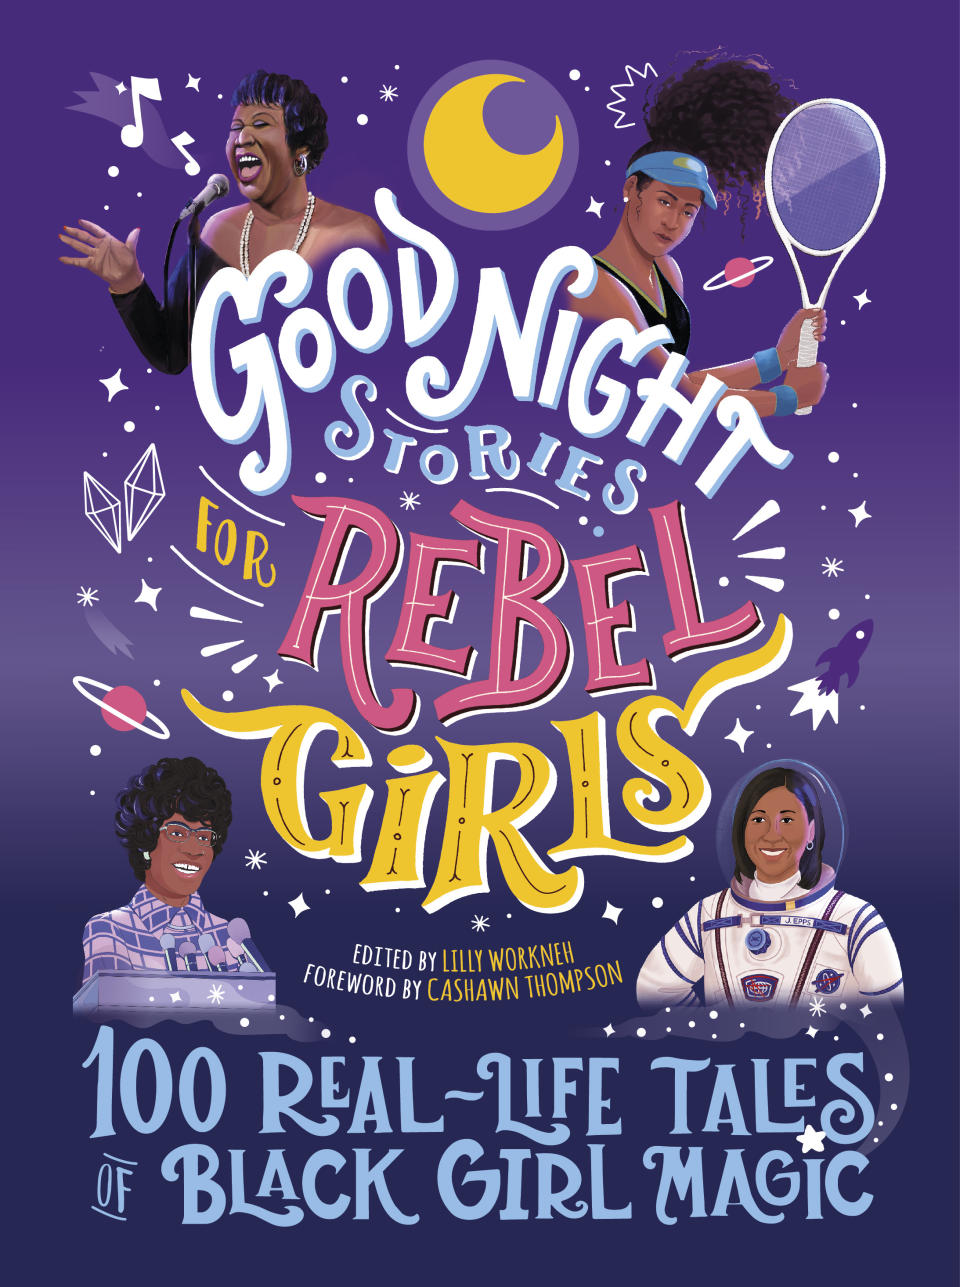 This photo shows the book cover for “Good Night Stories for Rebel Girls: 100 Real-Life Tales of Black Girl Magic,” edited by Lilly Workneh. (Rebel Girls via AP)